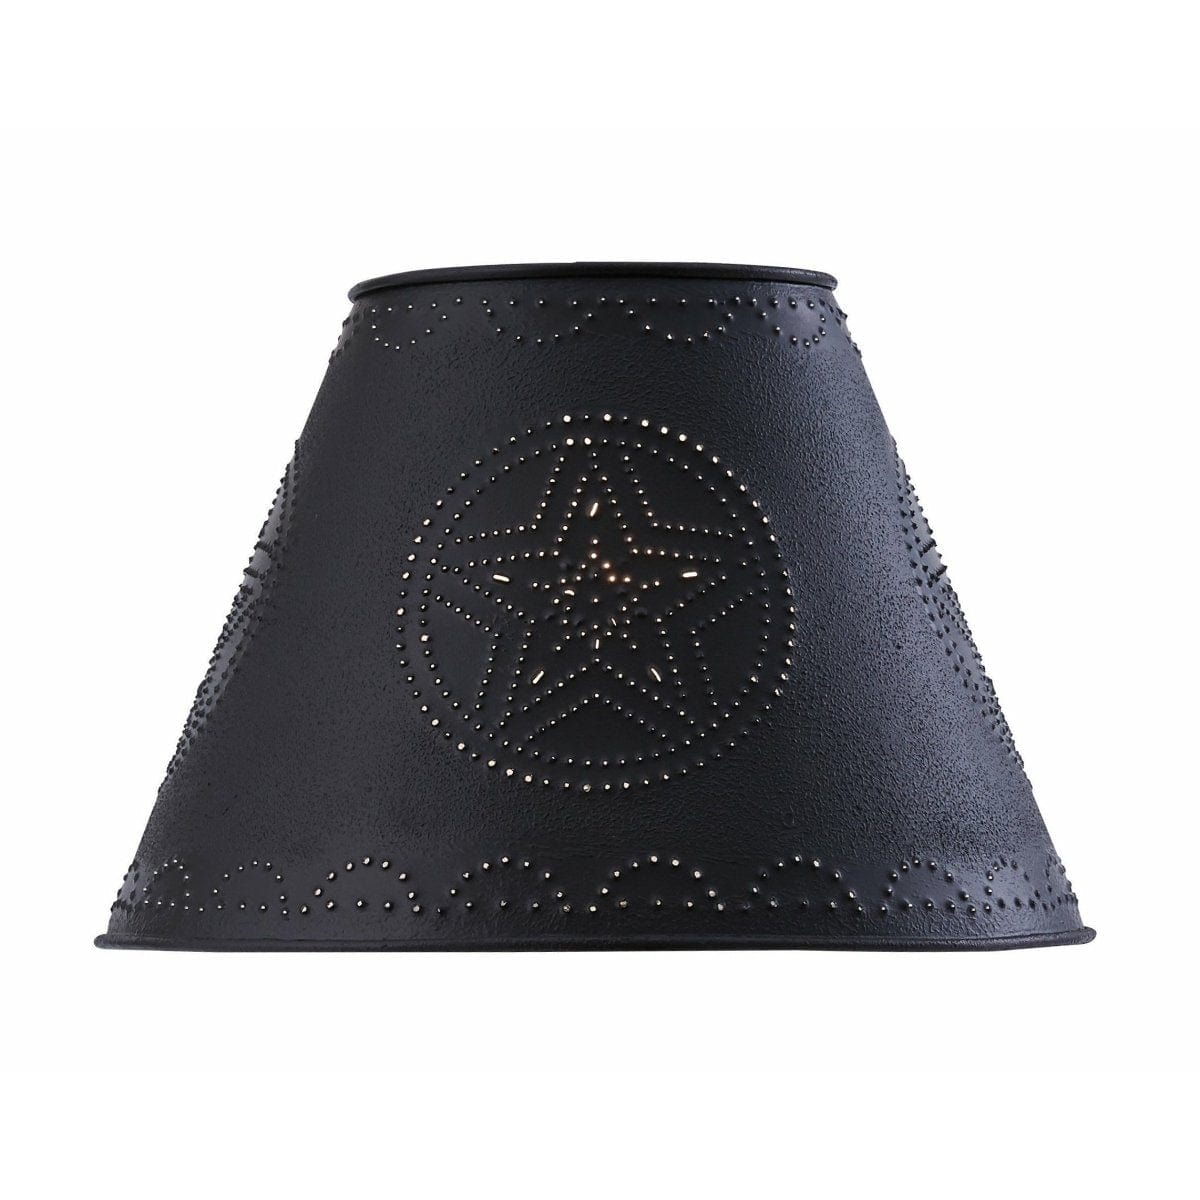 Star In Black Punched Tin Lamp Shade 6" Diameter Round-Park Designs-The Village Merchant